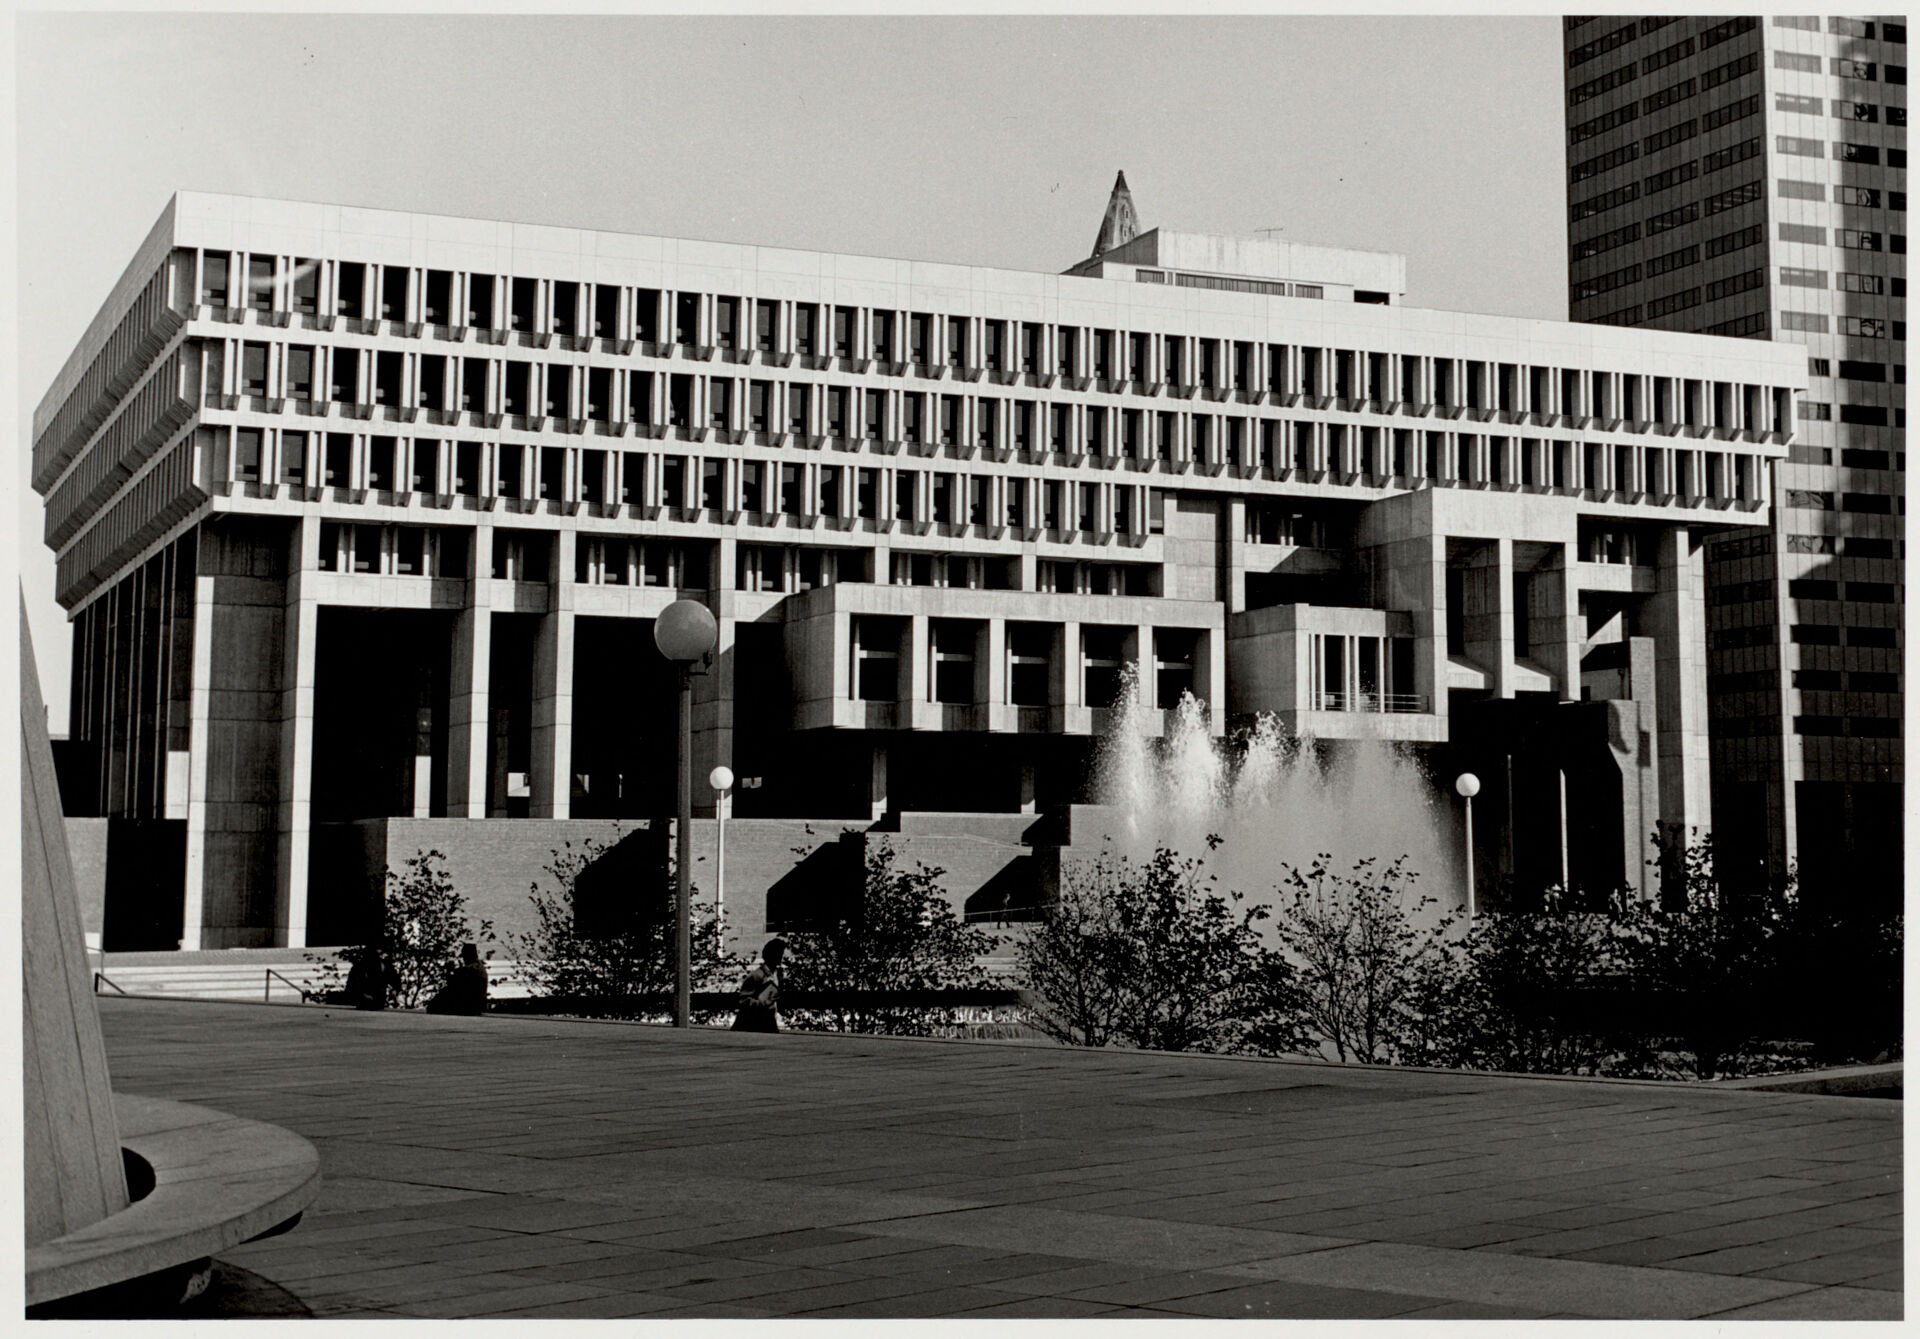 Photo of Boston City Hall with plaza fountain in front